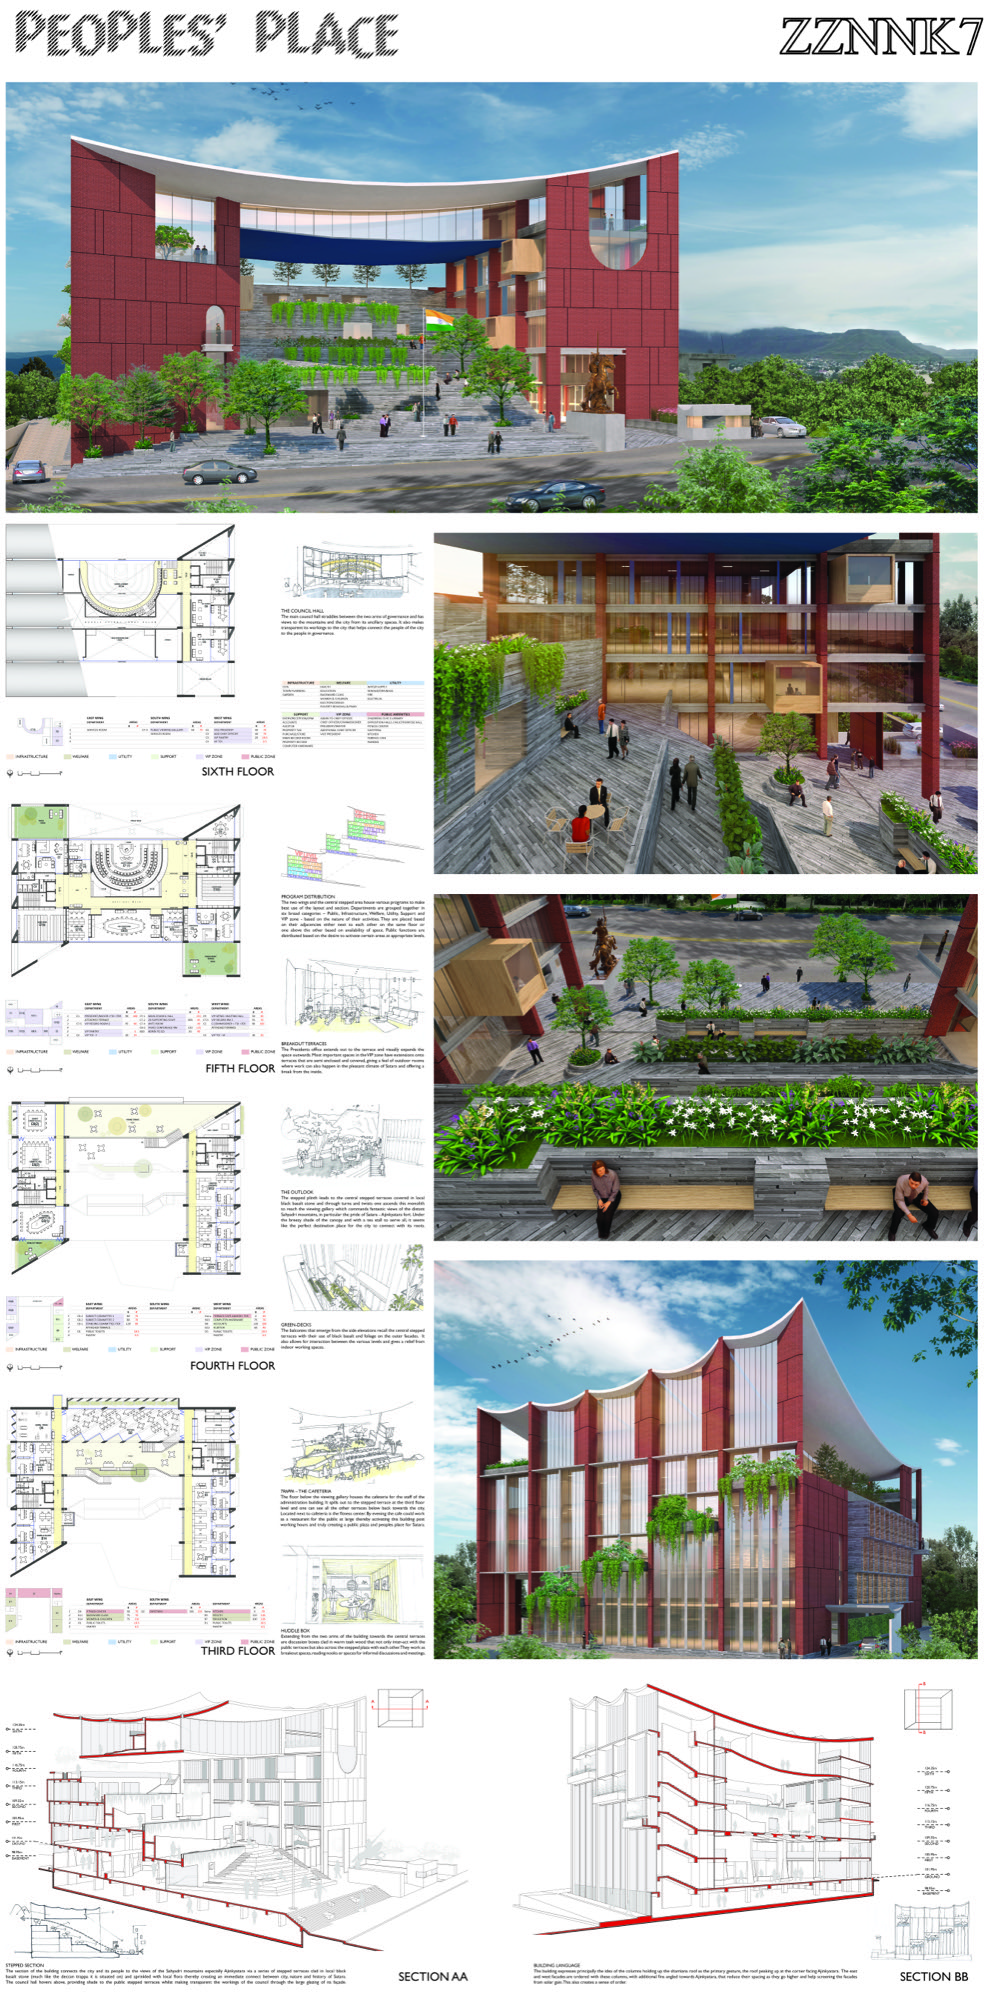 For People: Municipal Building for Satara, competition entry by S+Ps - Pinkish Shah and Shilpa Gore 15